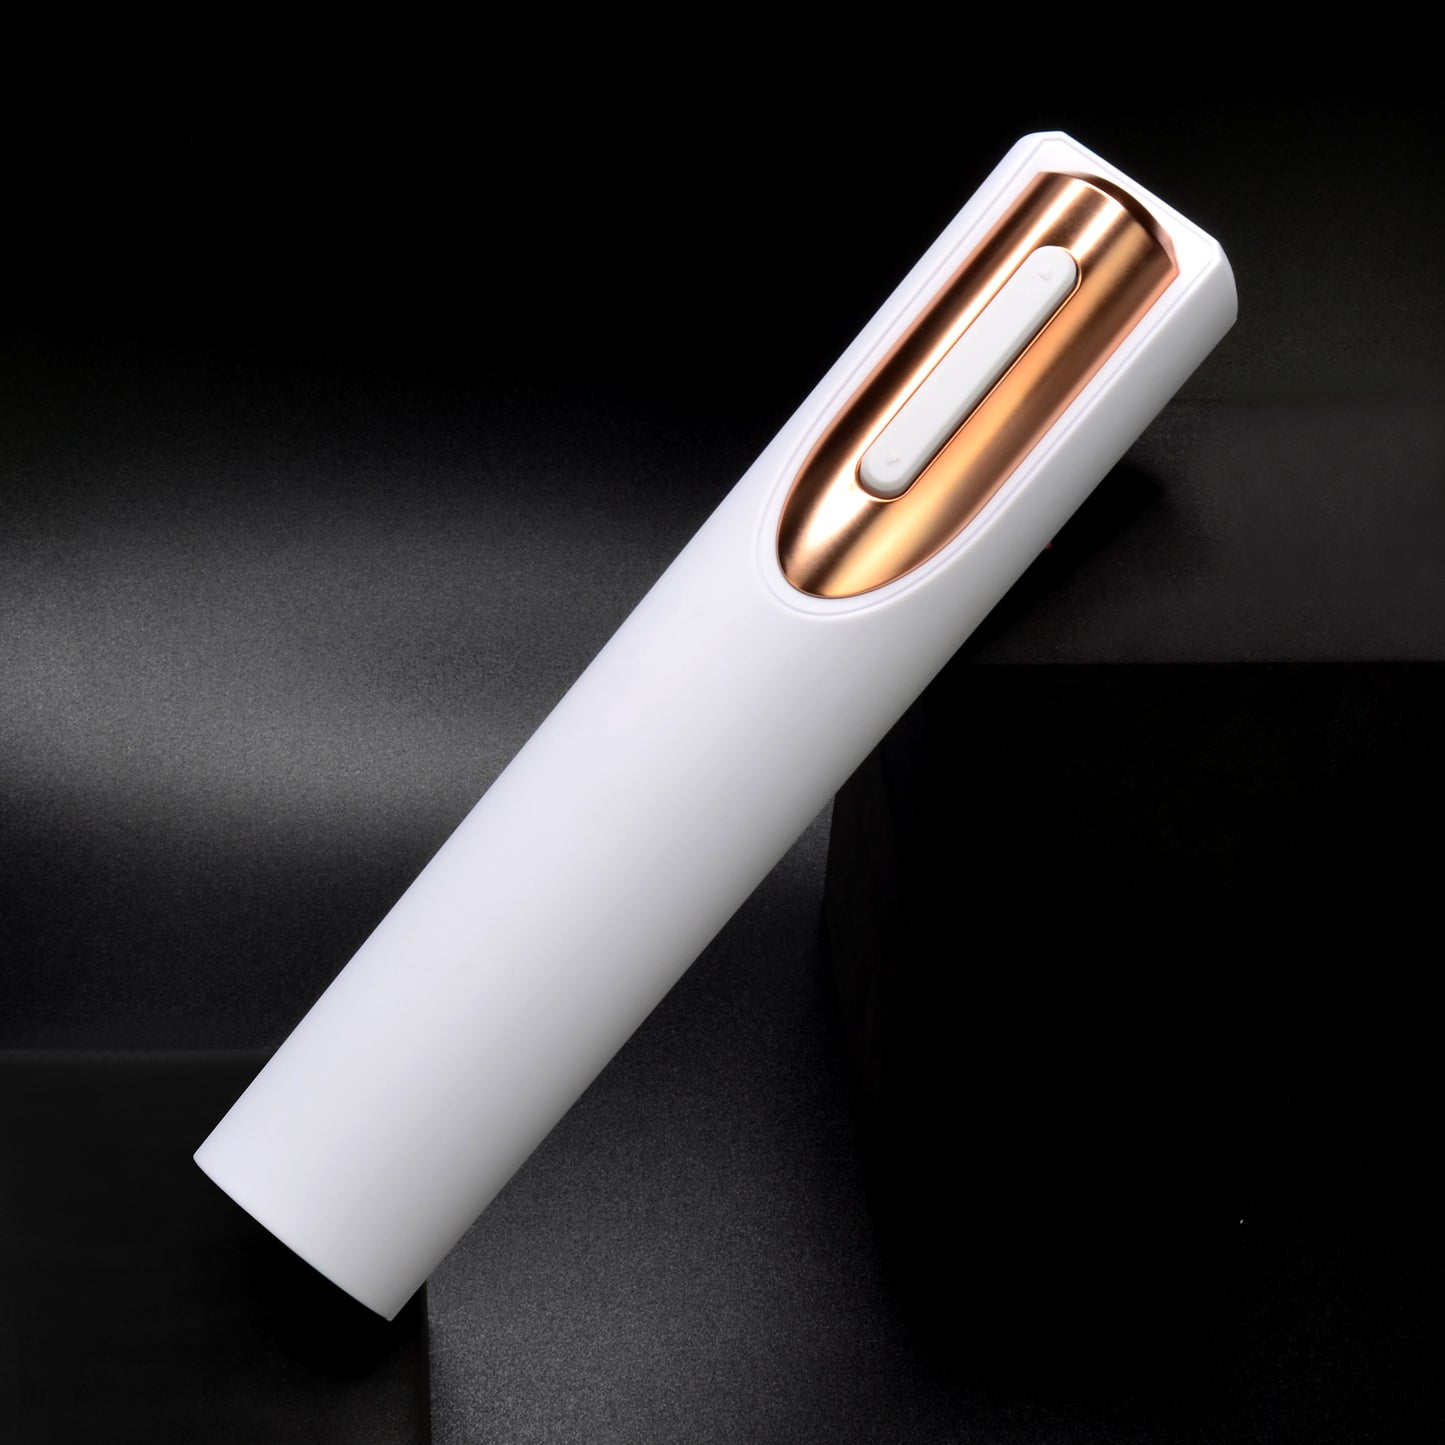 Rechargeable Electric Wine Bottle Opener with Charging Base & Foil Cutter